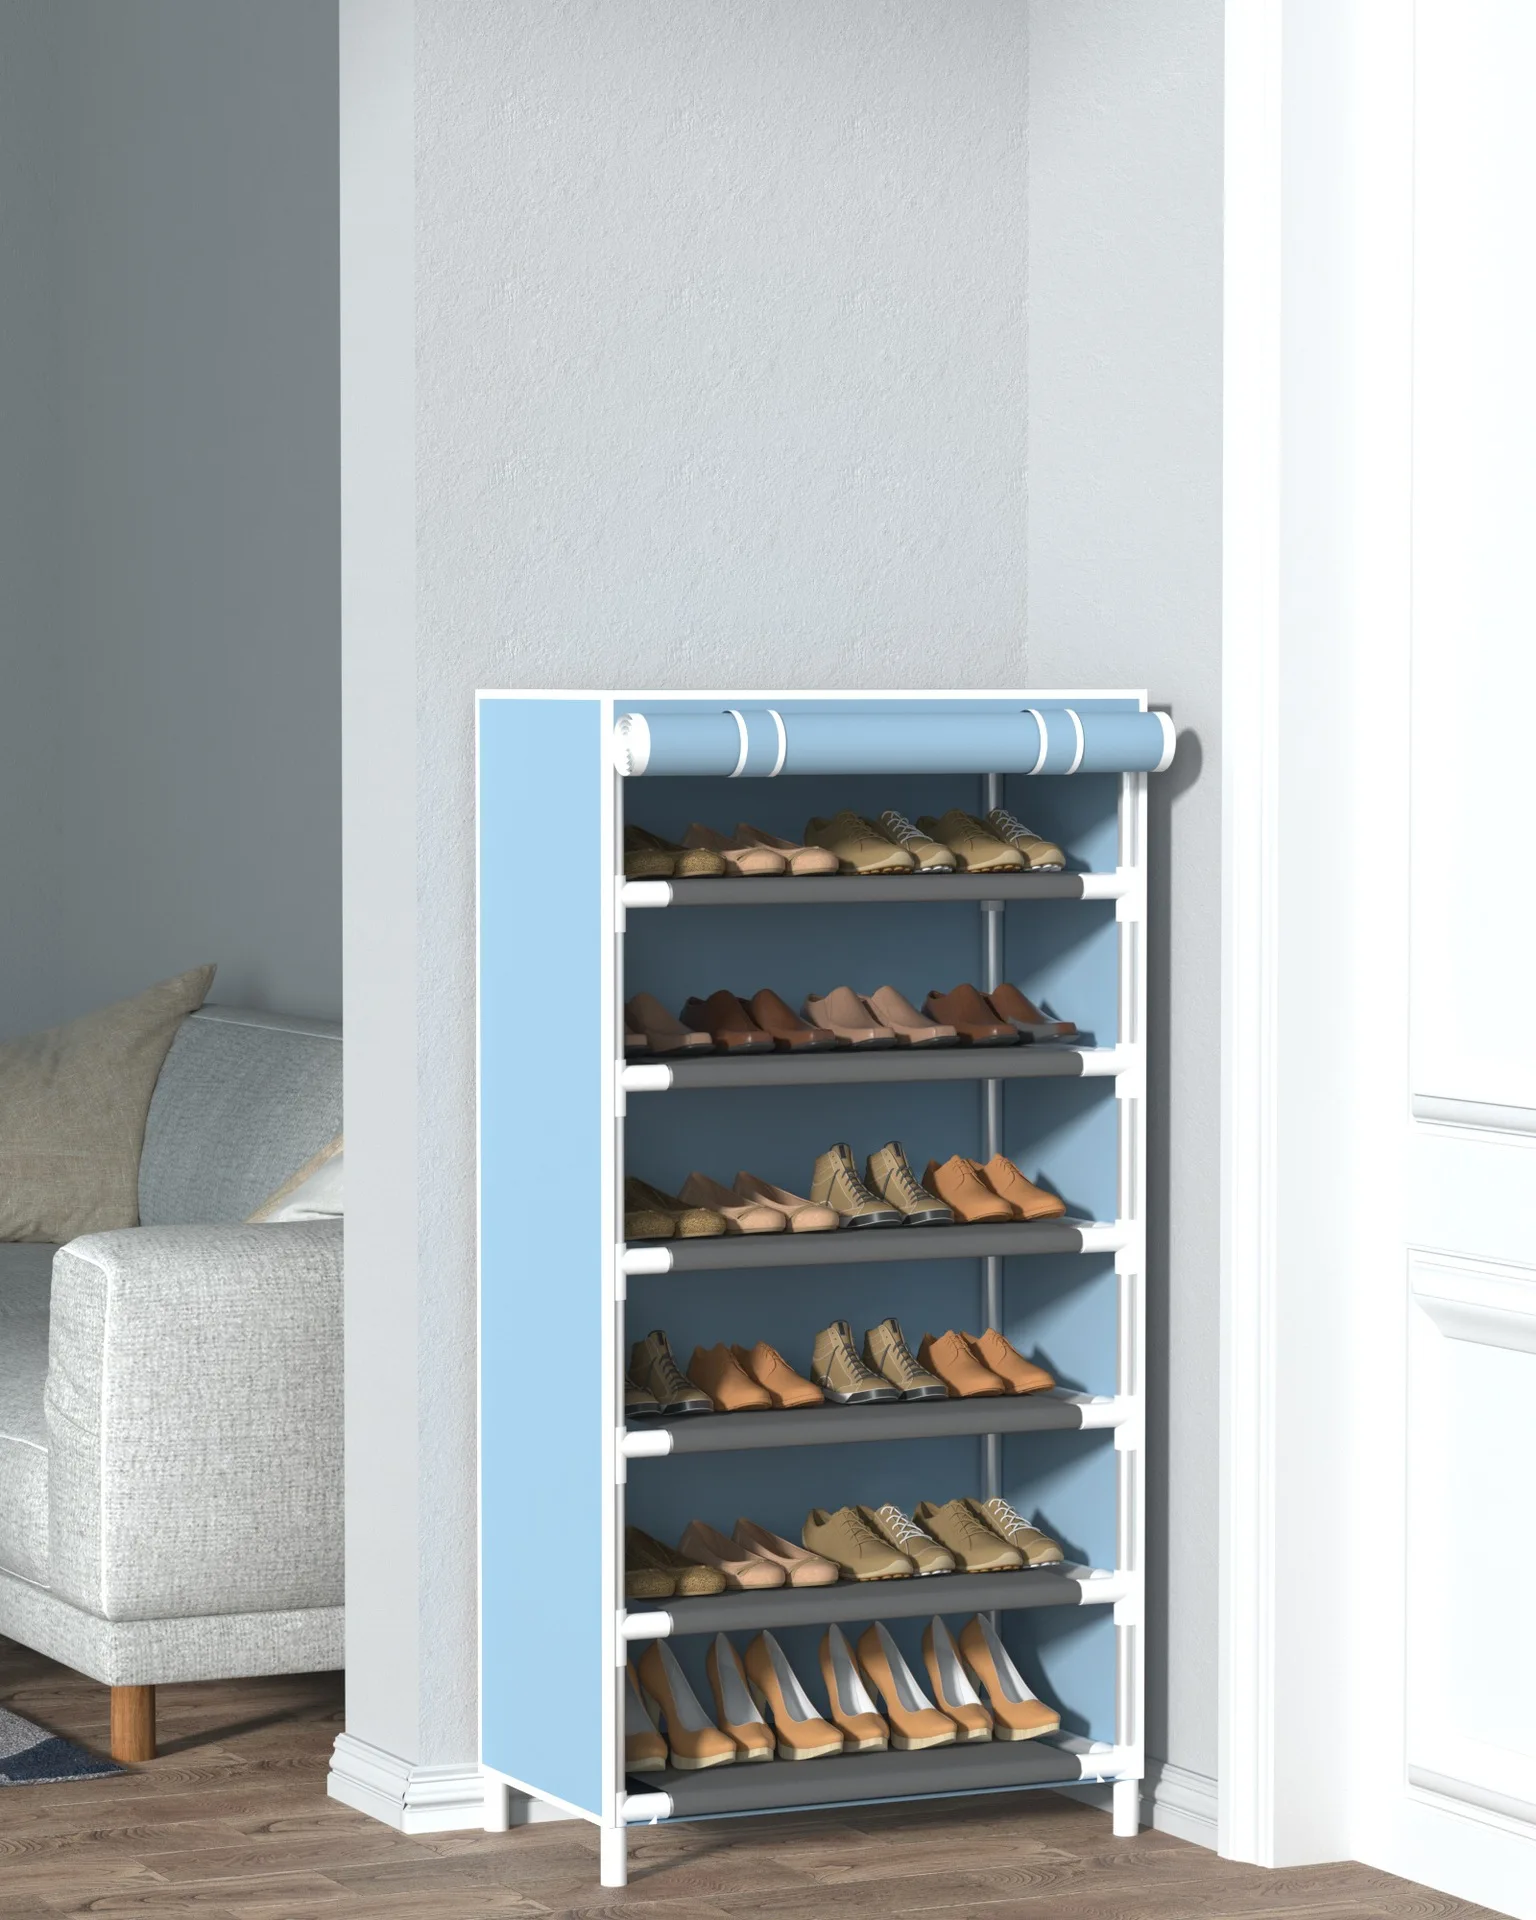 https://ae01.alicdn.com/kf/Sf24e5bb8758b44a881c60d132d6f776dM/Simple-Shoe-Rack-Multi-layer-and-Space-Saving-Assembly-Shoe-Rack-Non-woven-Fabric-Combination-Dust.jpg